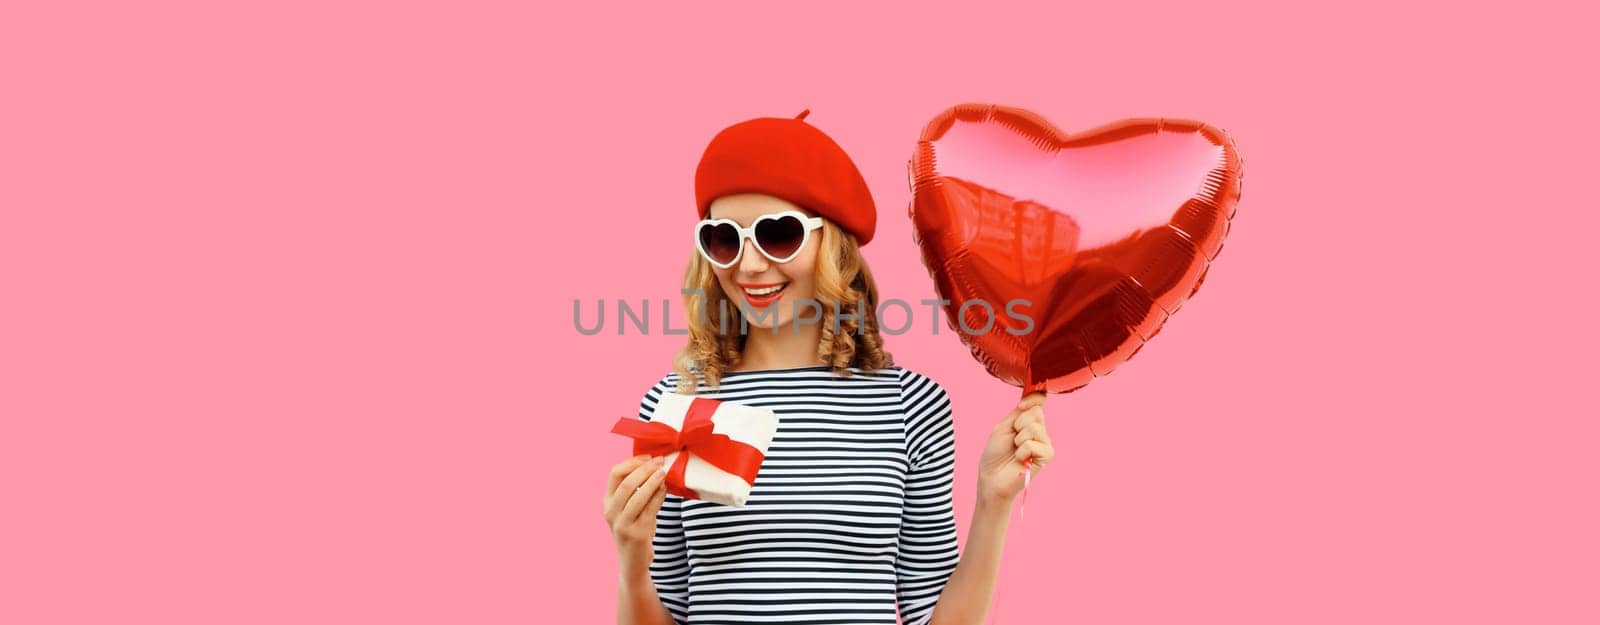 Cute portrait of happy smiling young woman with red heart shaped balloon and gift box wearing french beret hat on pink studio background